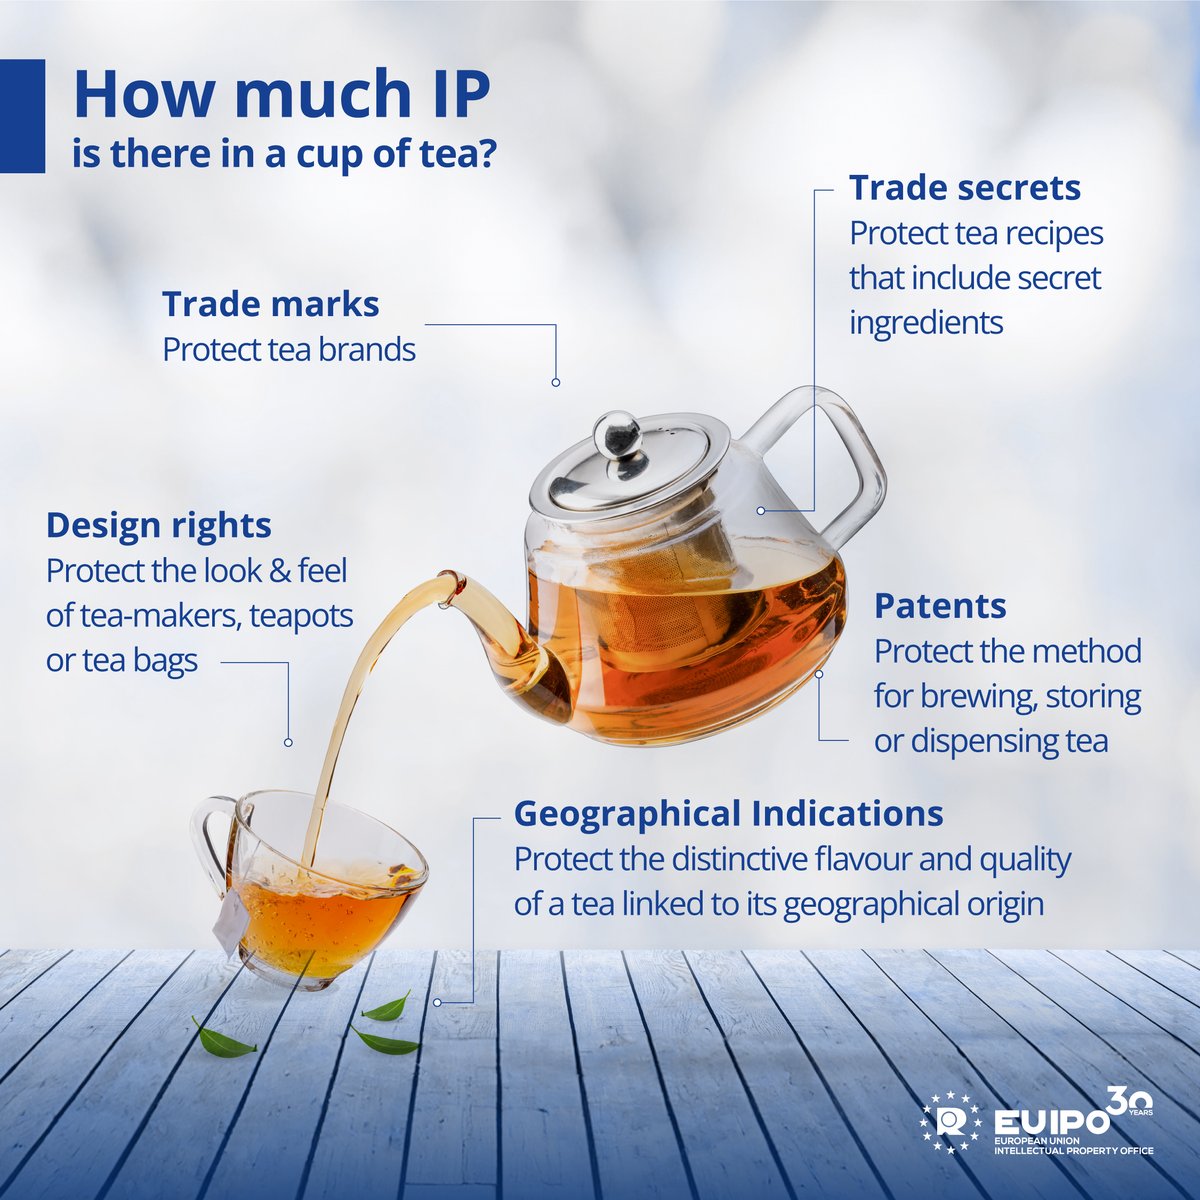 Happy #InternationalTeaDay! Are you a tea lover? Then you’ll be surprised to know how much IP there is in a warm cup of tea 🍵 . From trade marks to patents or trade secrets, IP rights protect and safeguard this ancient drink so that it doesn’t lose a bit of its essence.